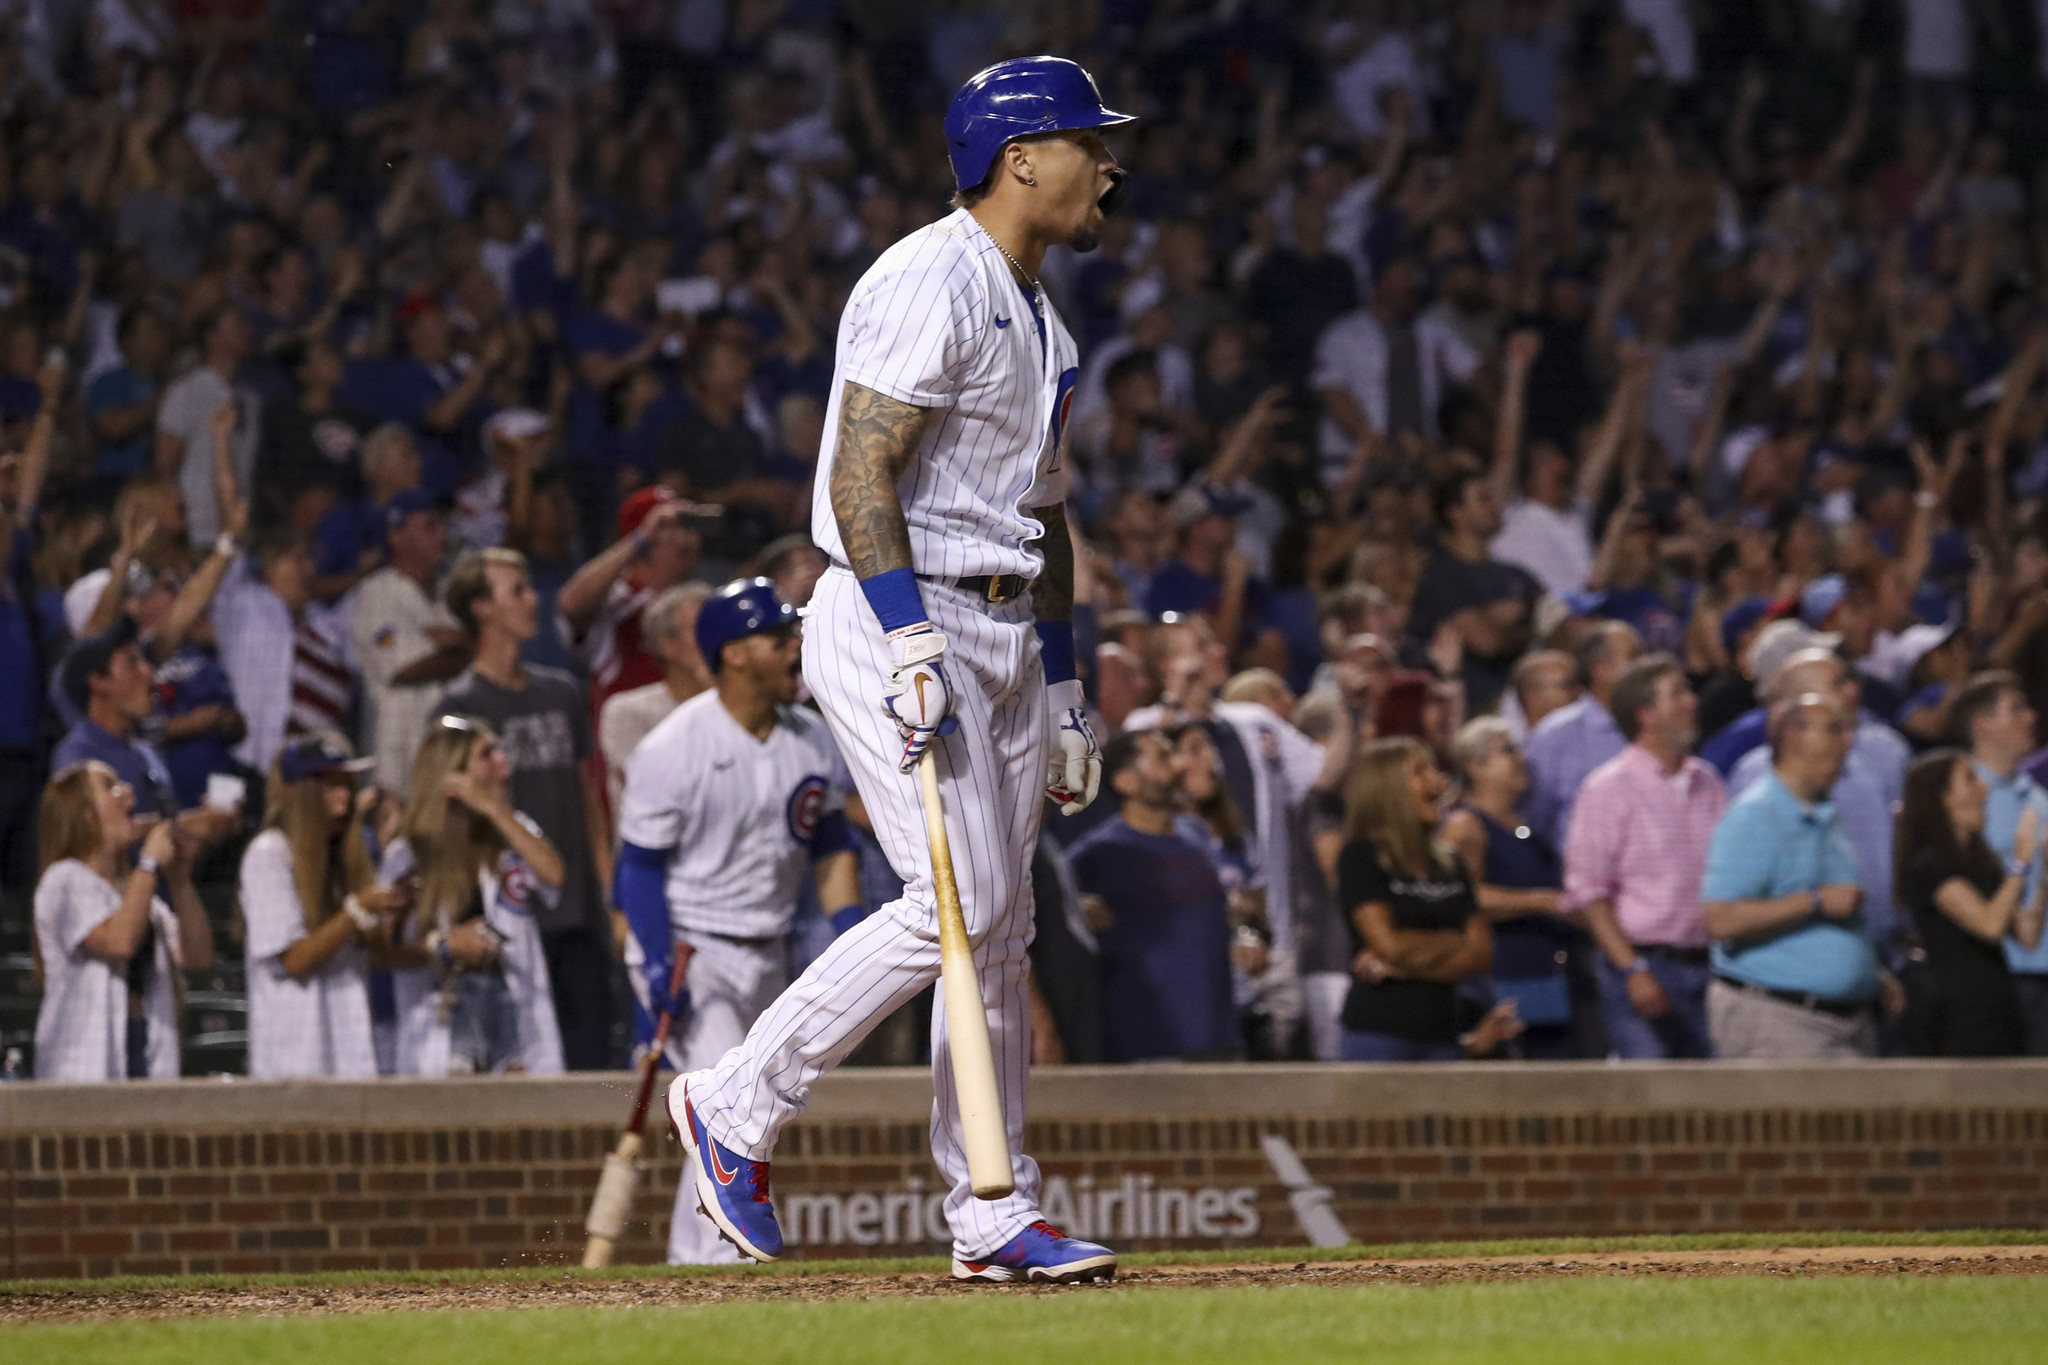 Mets Acquire Javier Baez in Trade With Cubs - The New York Times